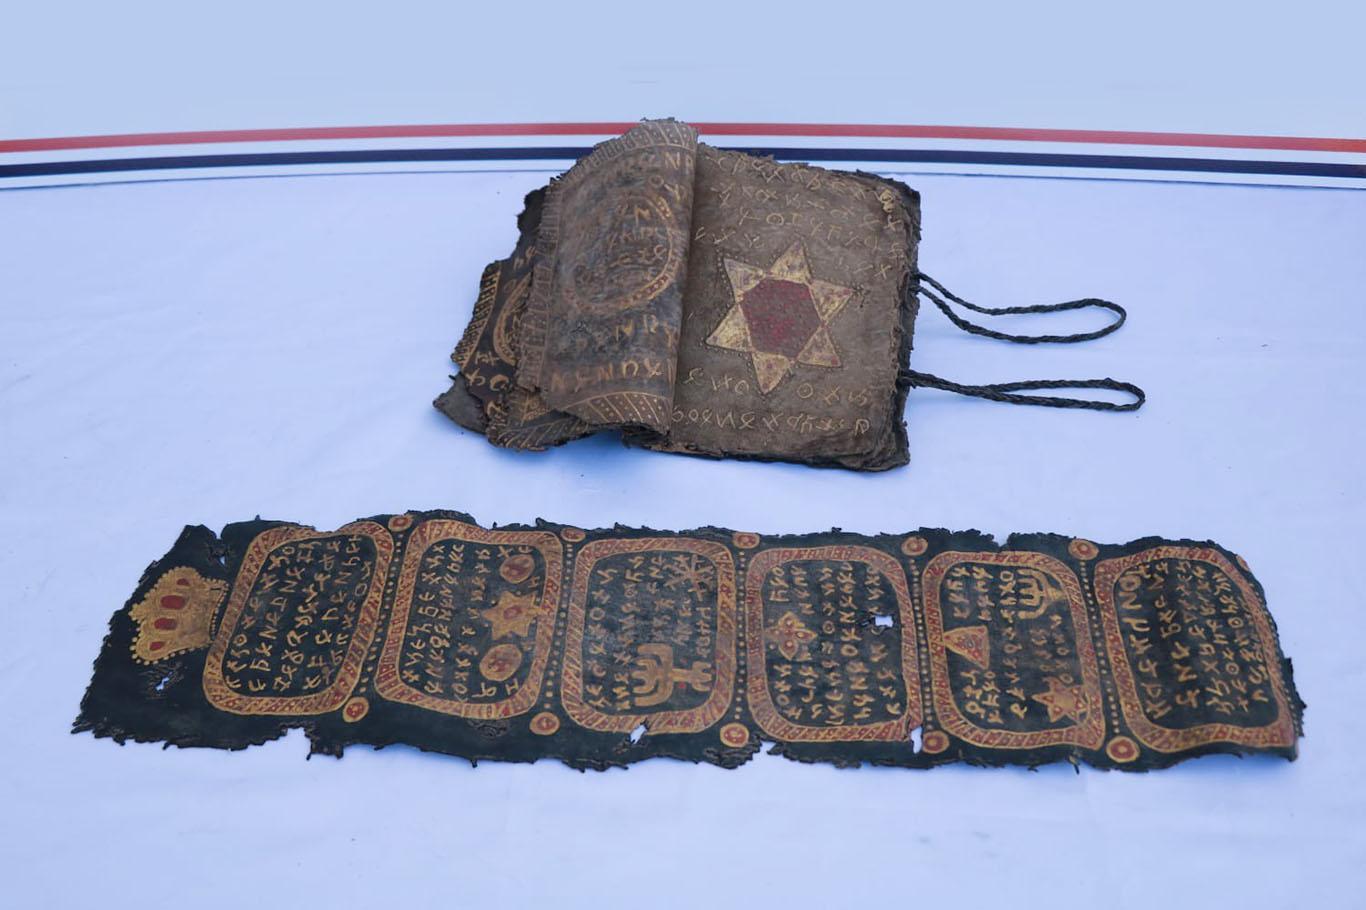 Police seize 800-year-old Bible